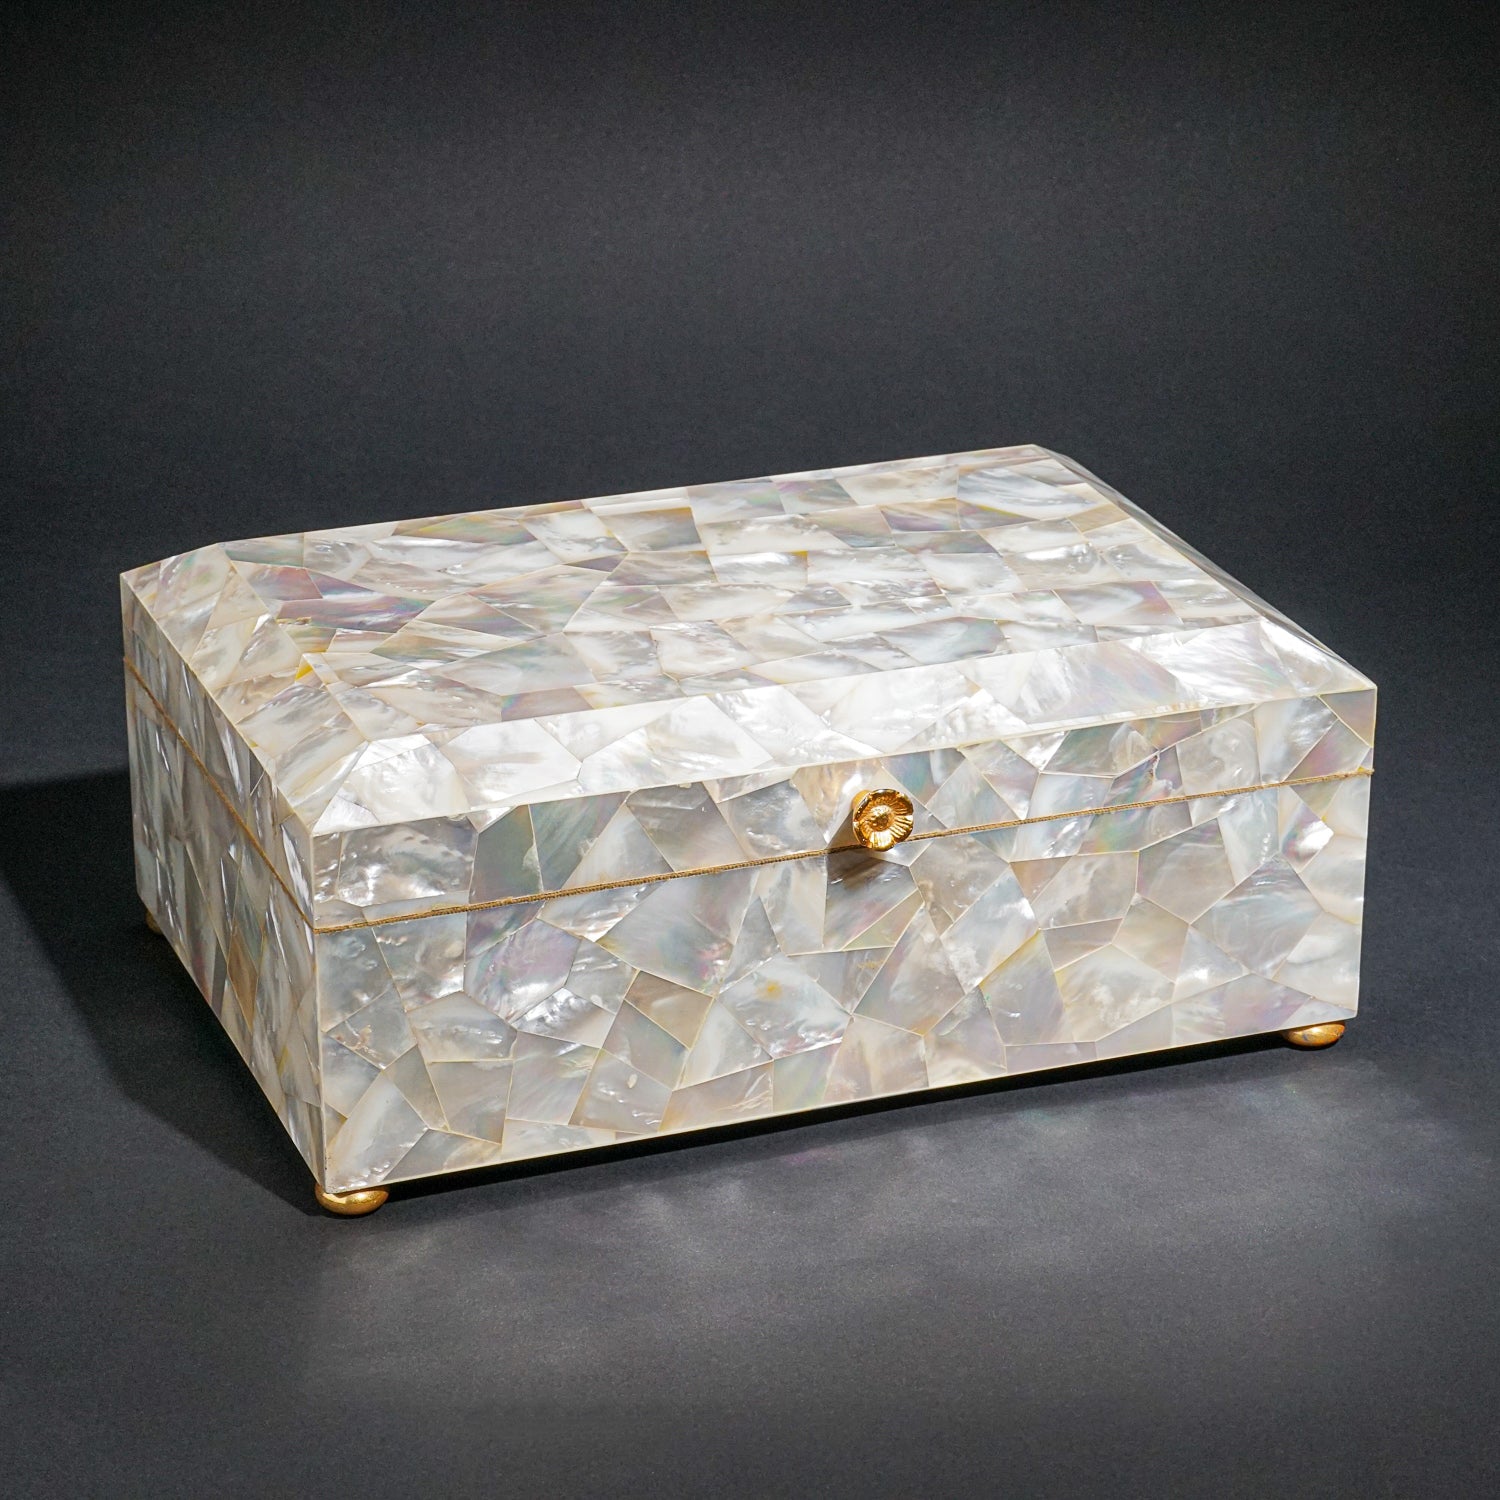 Genuine Large Mother of Pearl Jewelry Box (9.5 lbs)